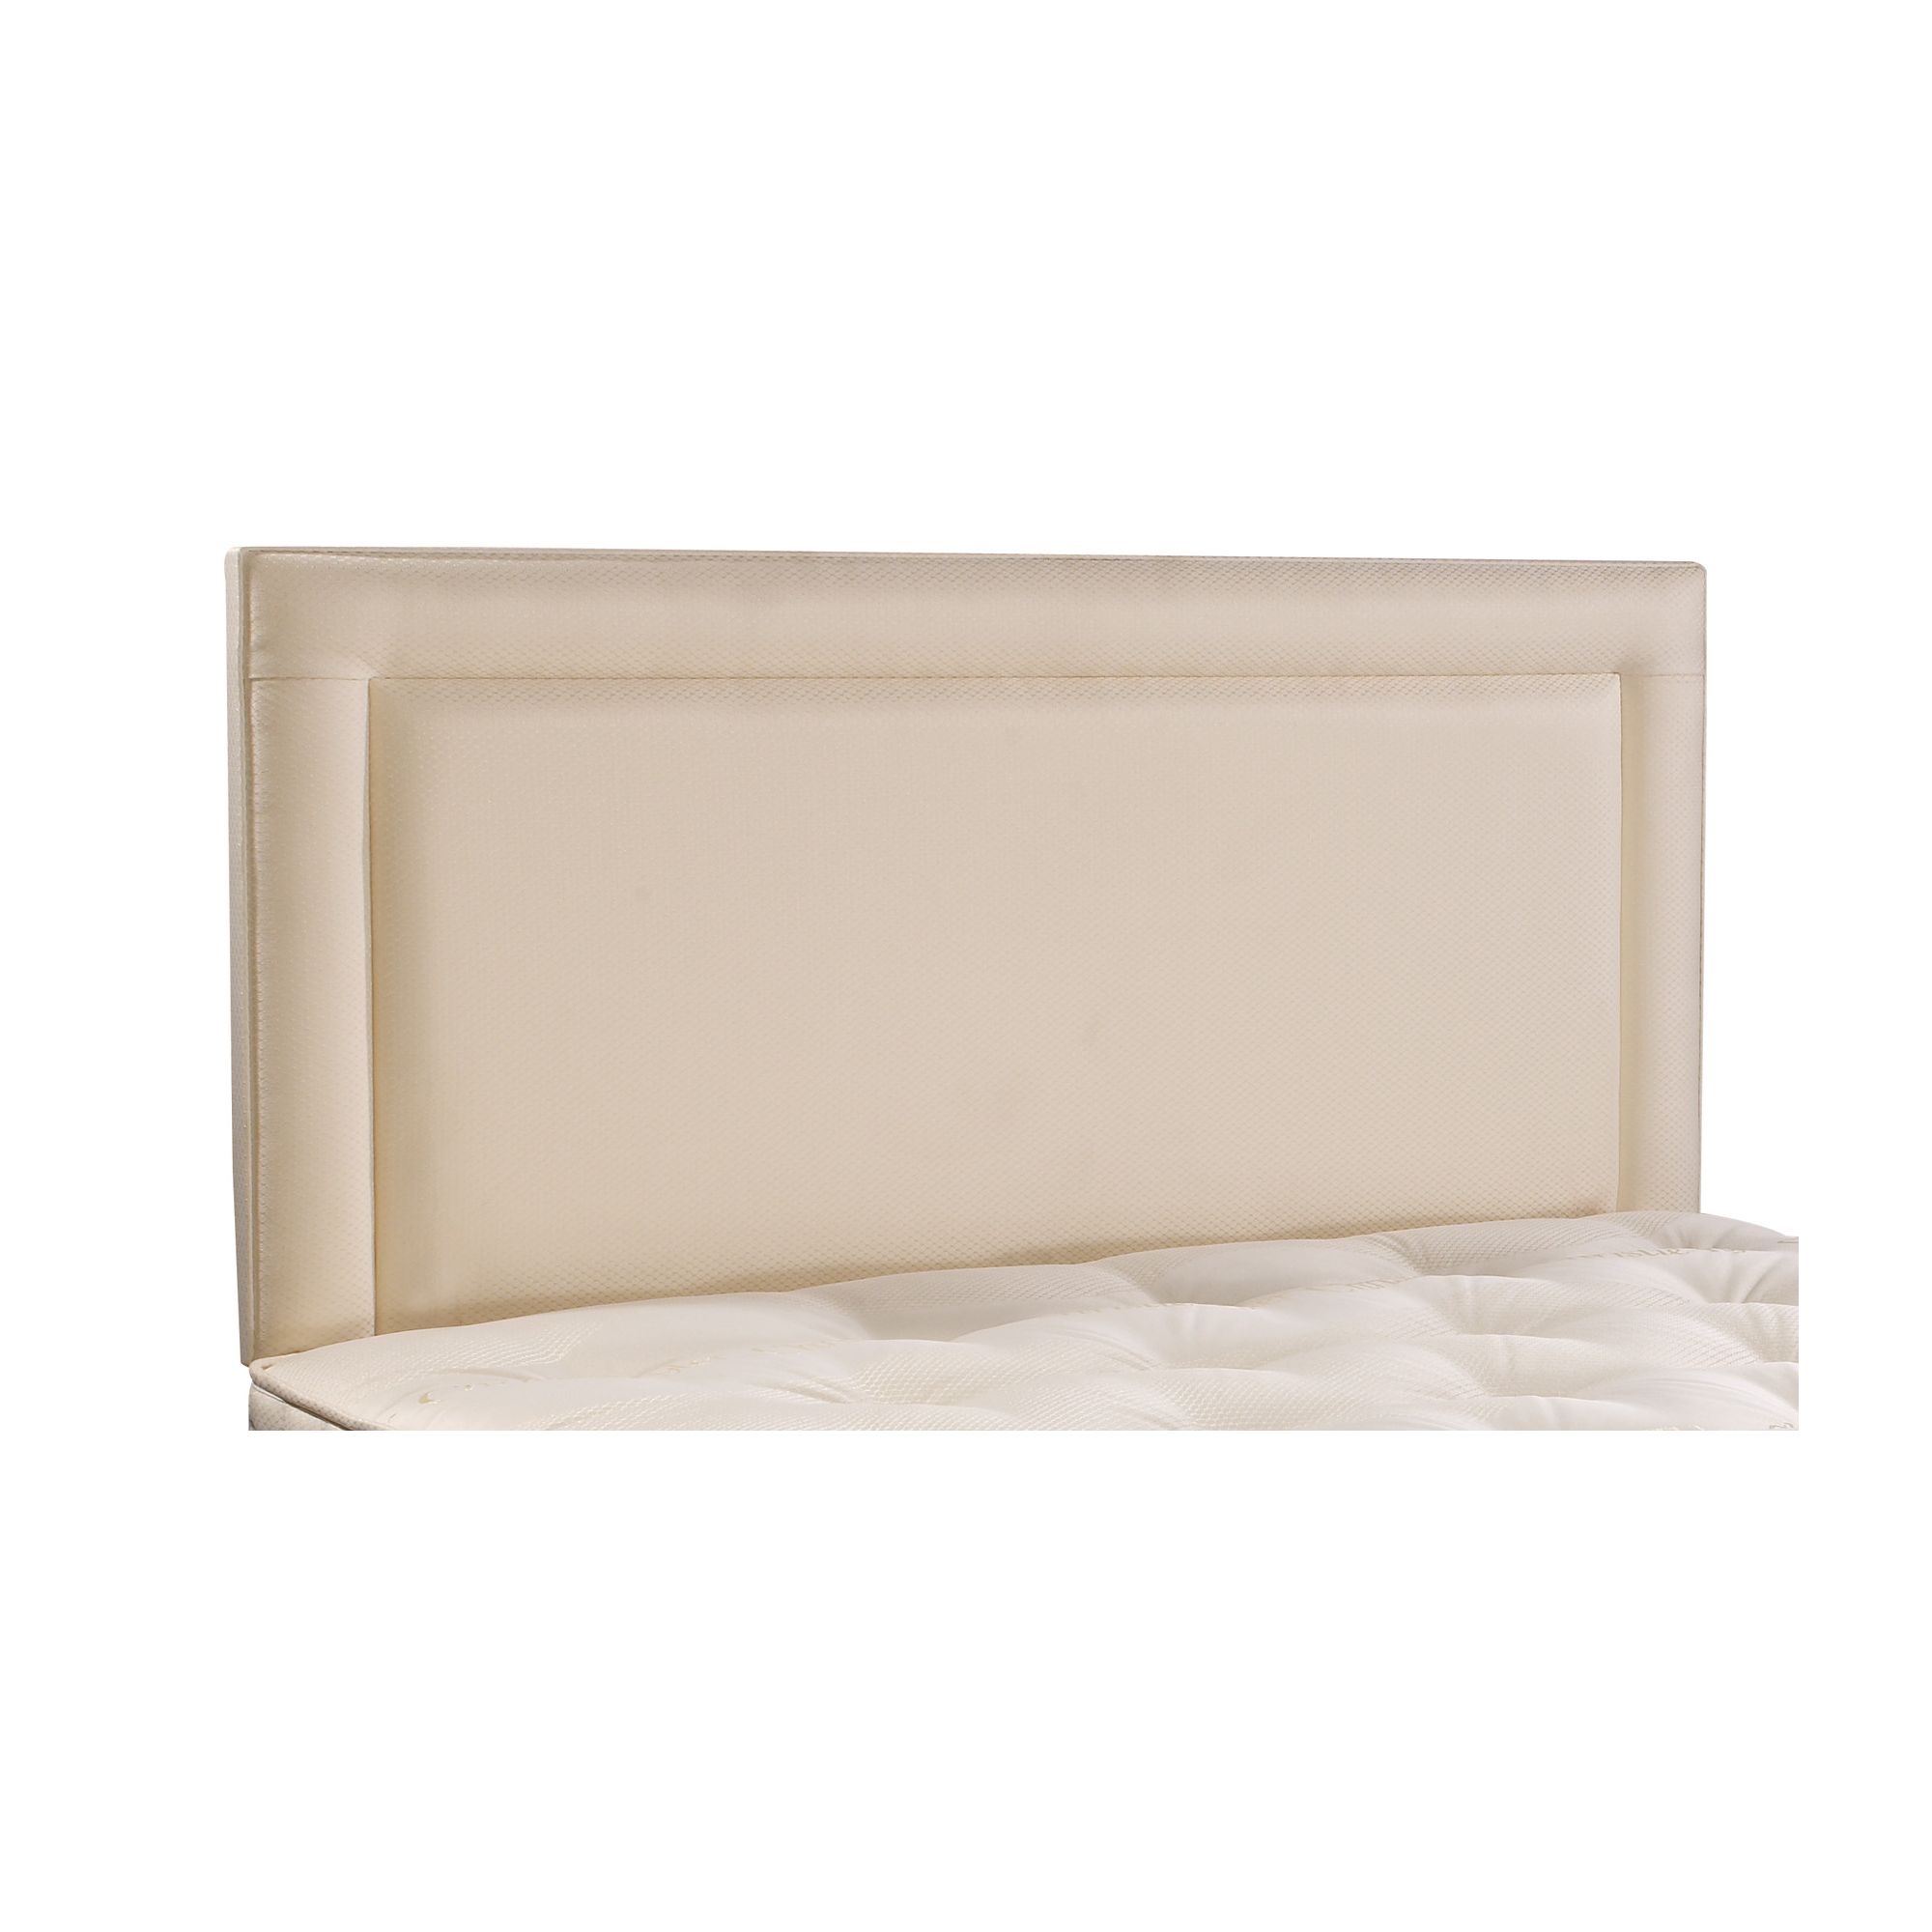 Christie-Tyler Classic Ortho 1000 Headboard - Super King at Tesco Direct